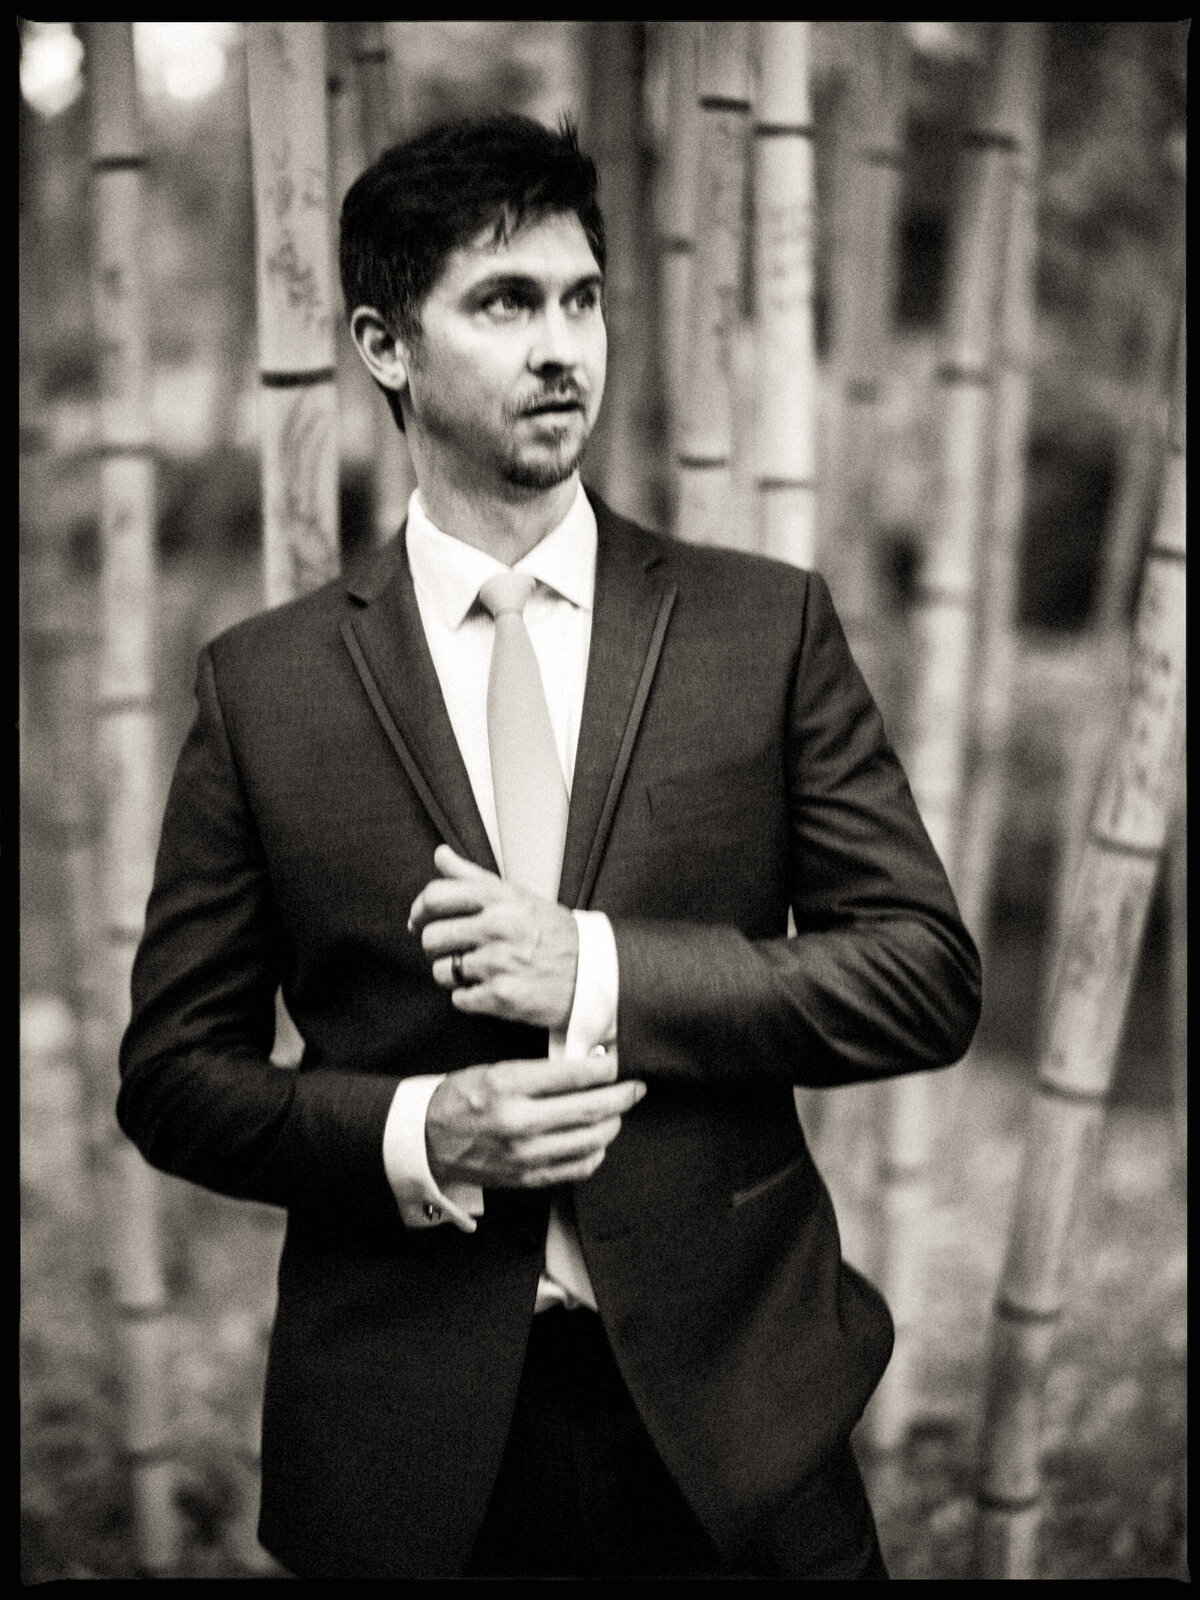 A groom in a dark suit adjusting his cufflink, looking thoughtful amidst a backdrop of soft-focus bamboo